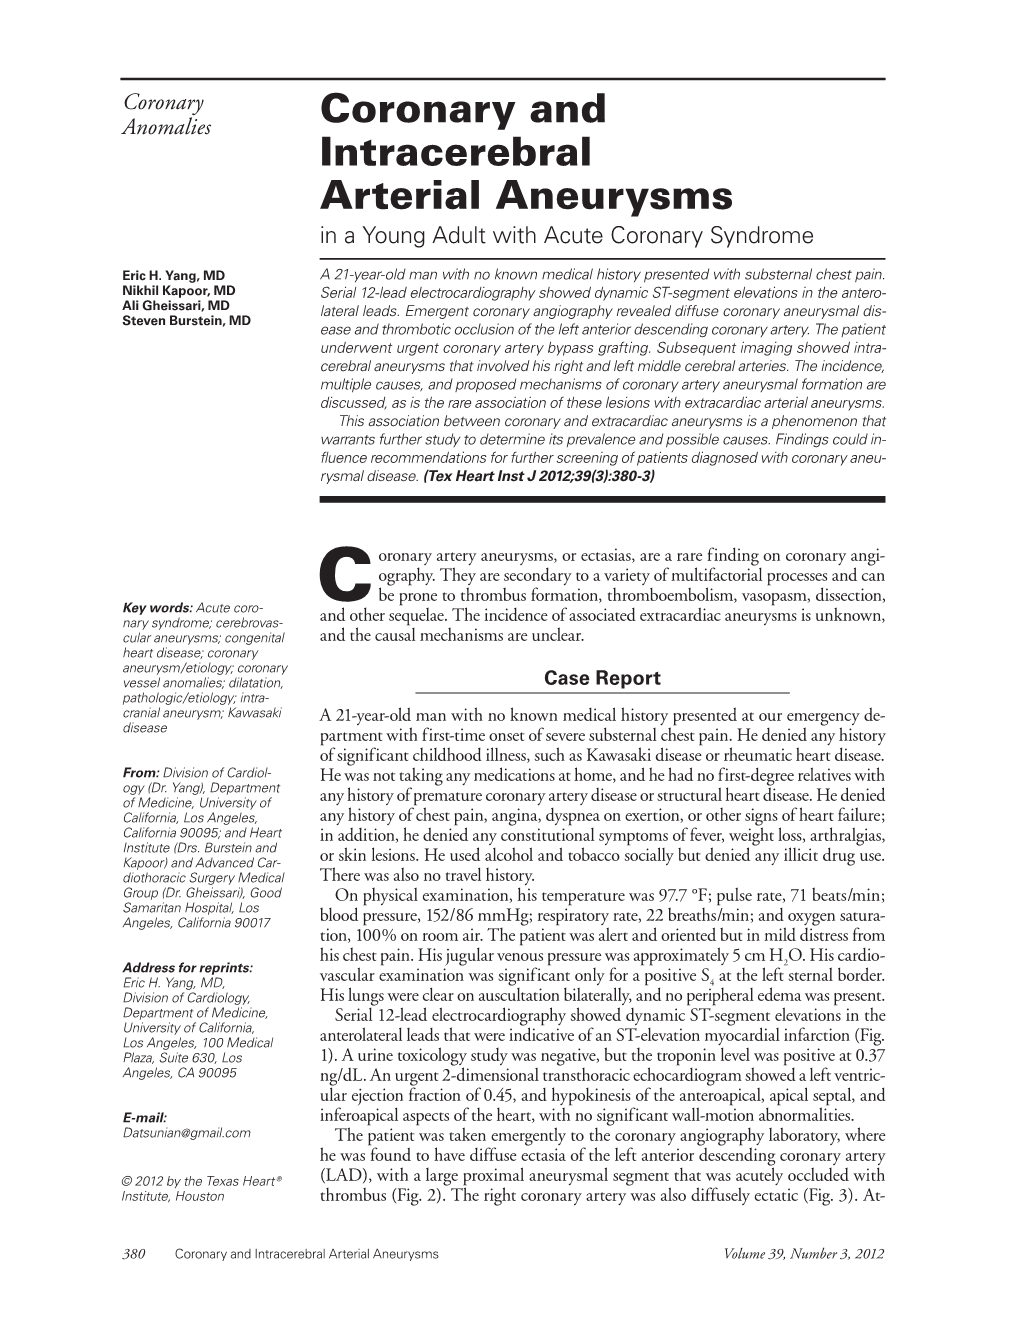 Coronary and Intracerebral Arterial Aneurysms Volume 39, Number 3, 2012 Tempts to Cross the Occlusion with a Guidewire Failed